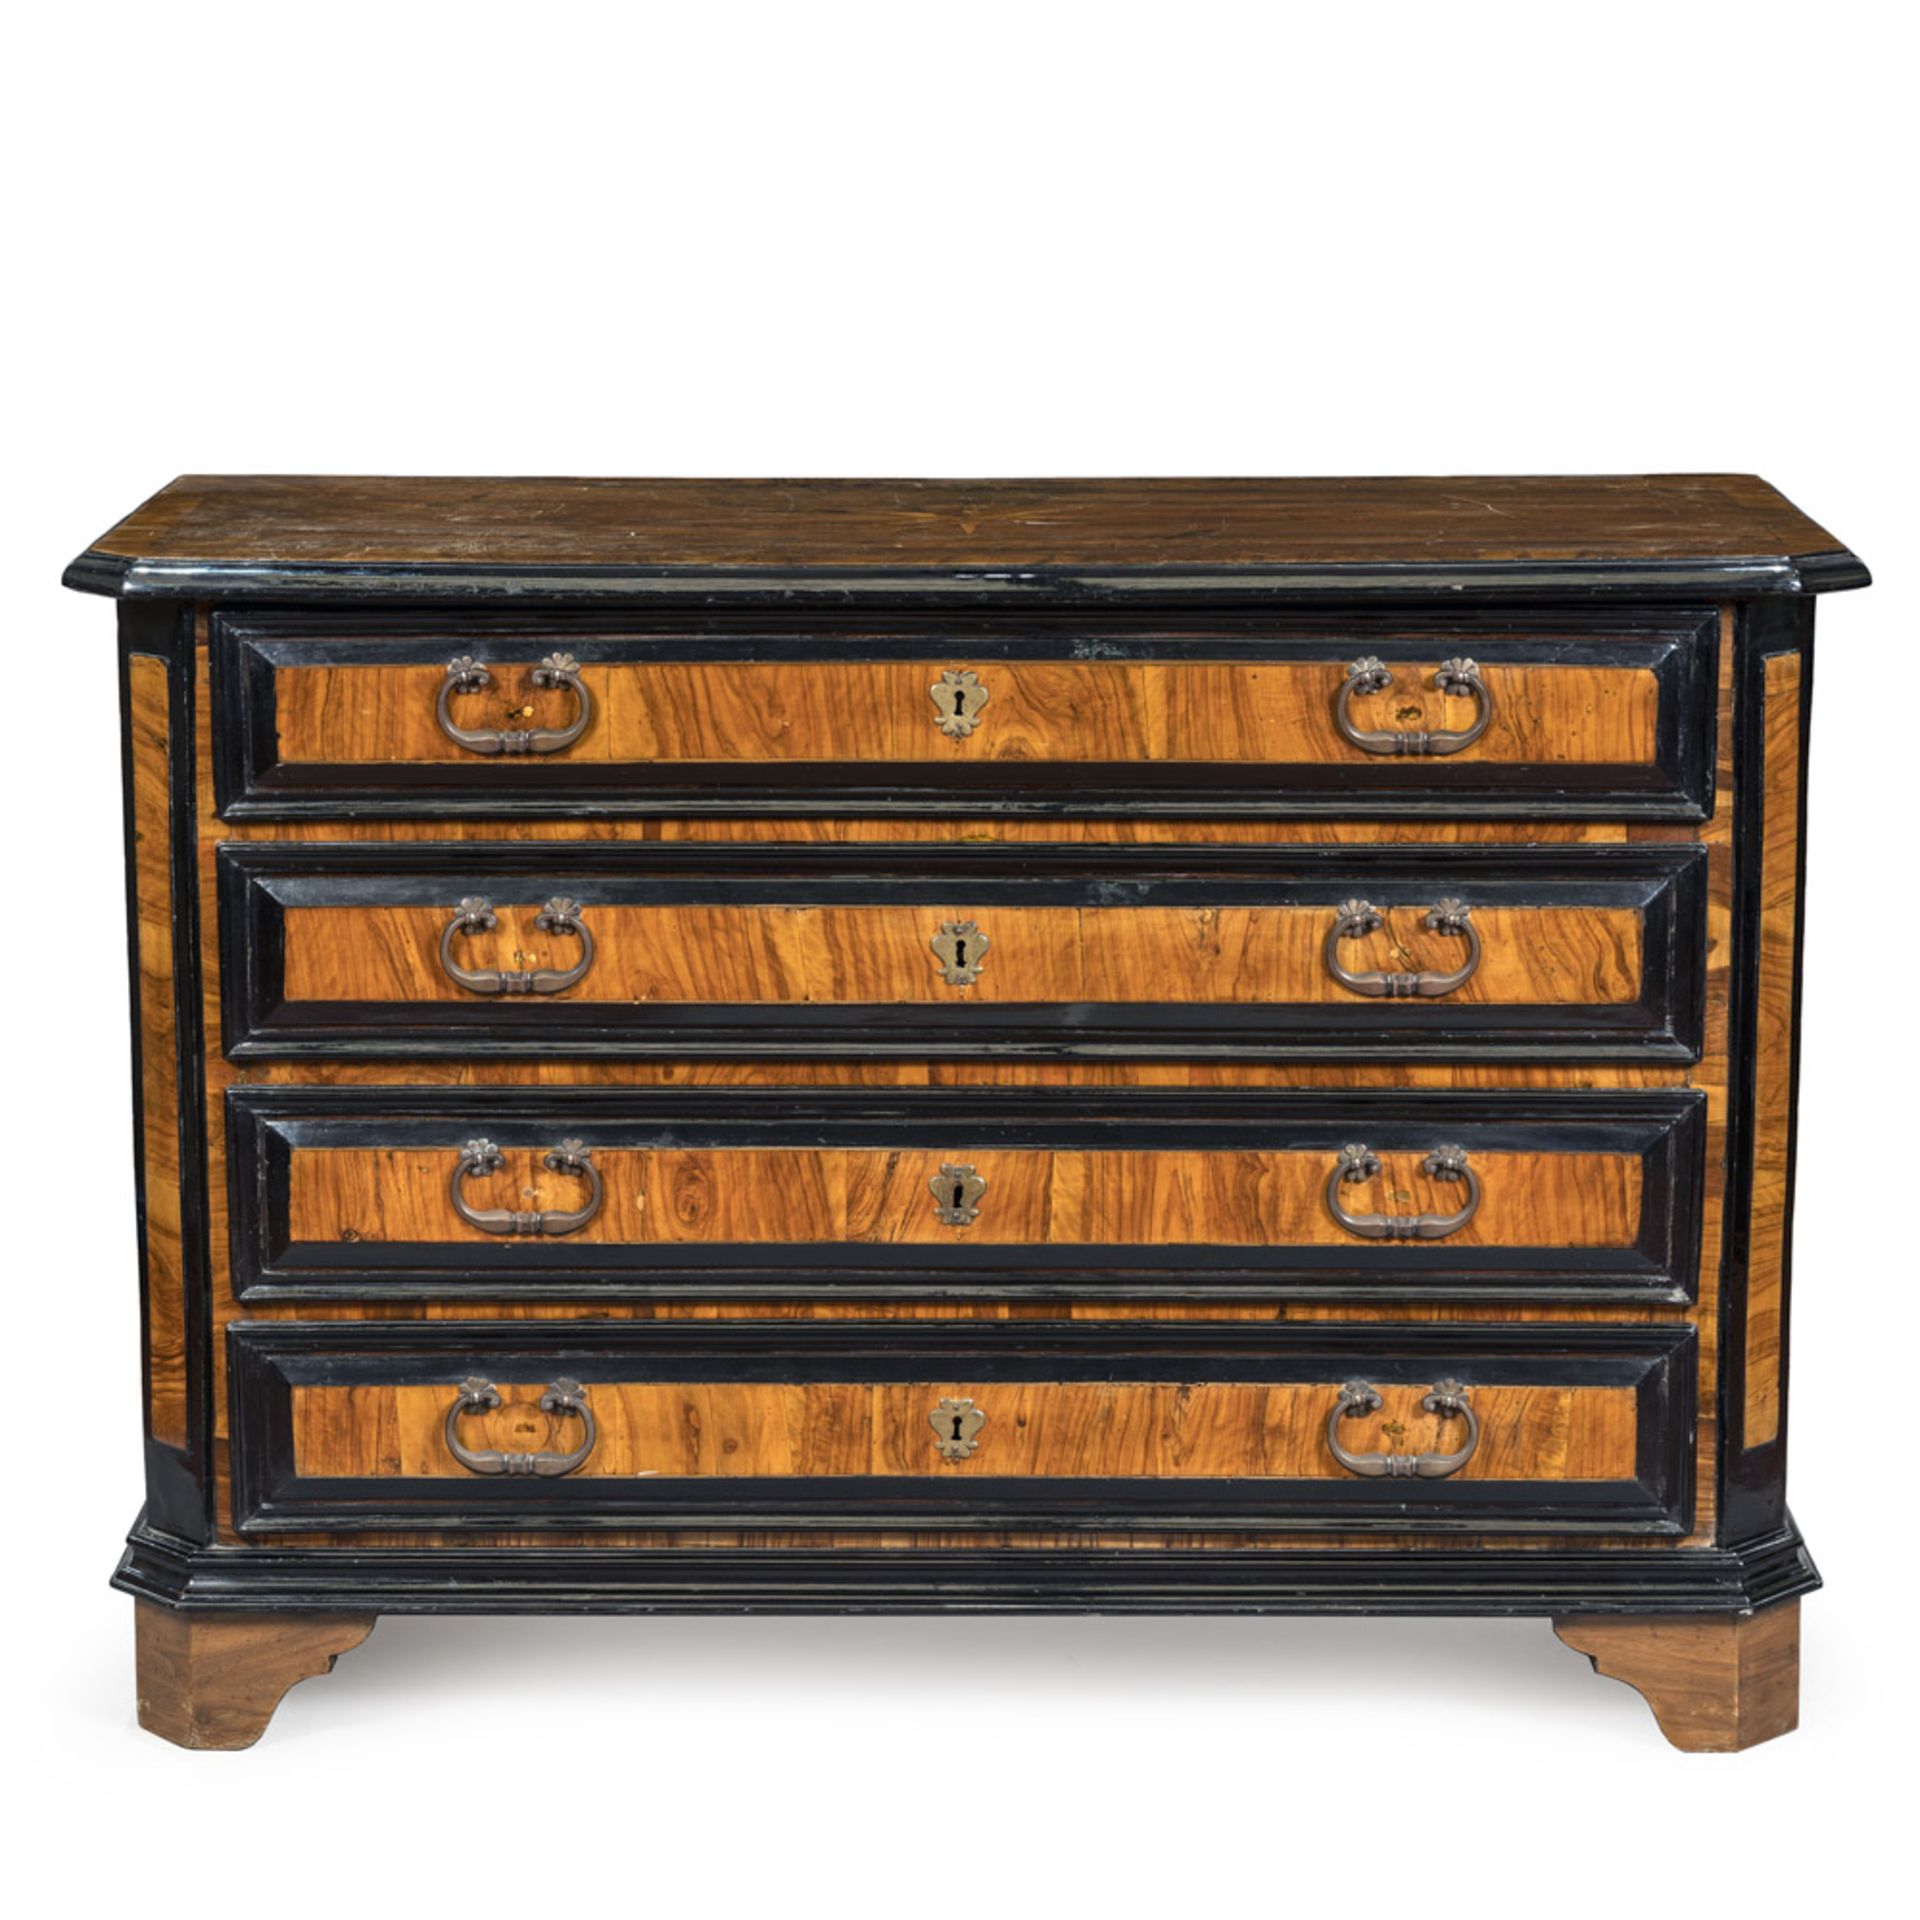 Walnut and olive wood chest of drawers